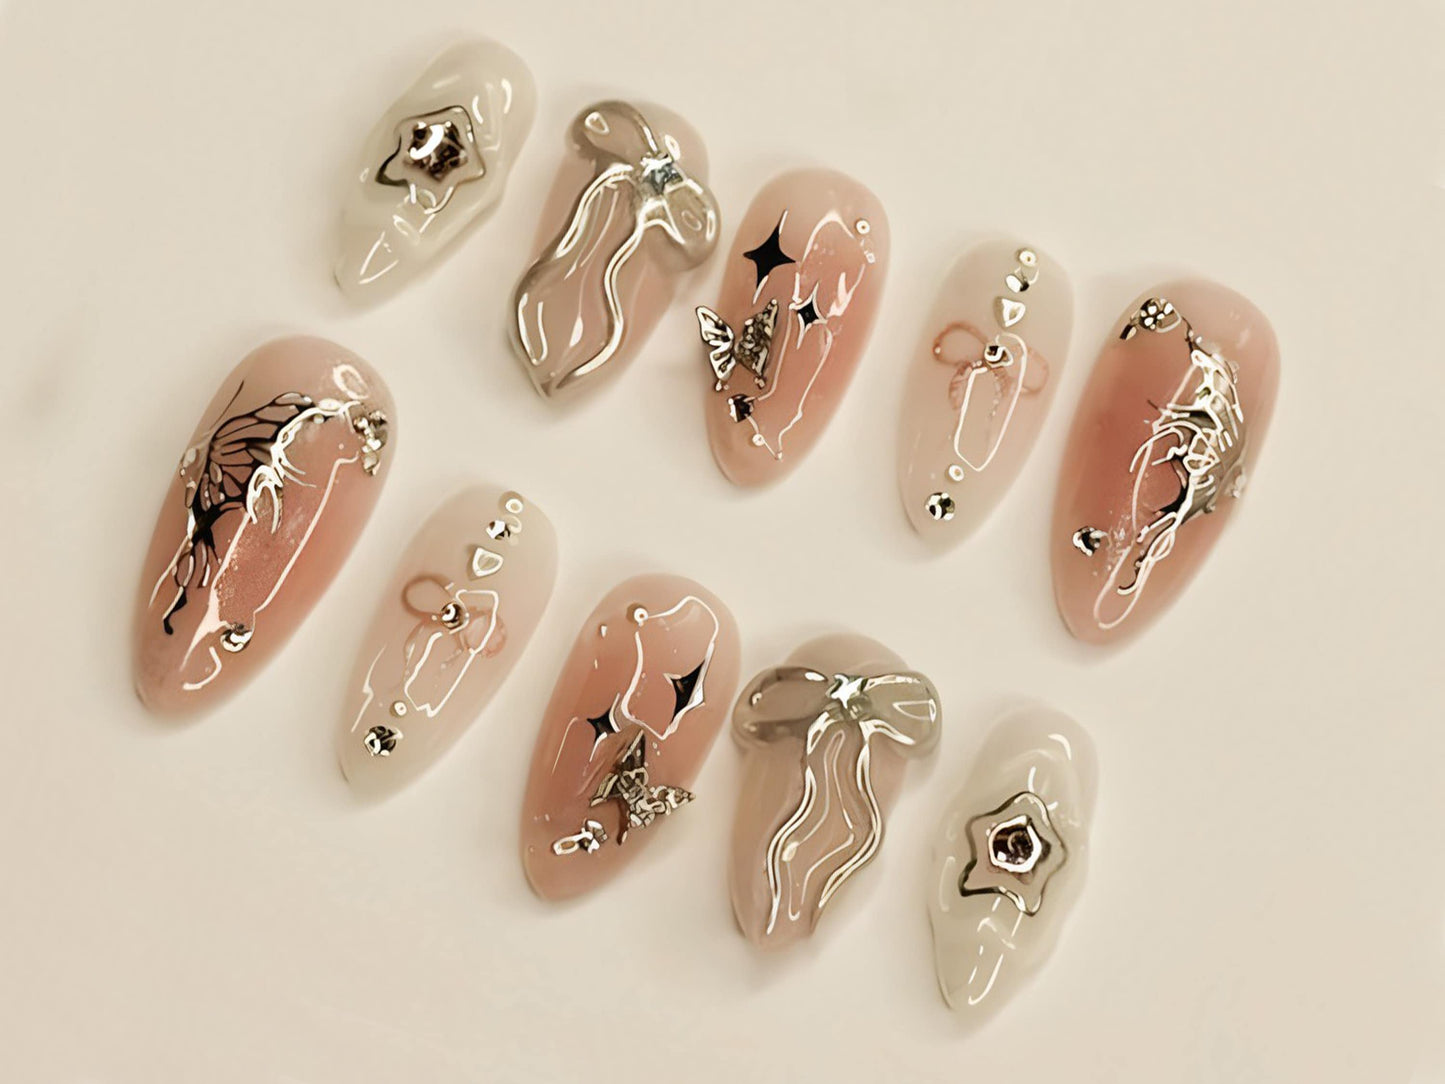 Sliver Butterflies Press On Nails | Pink Nail Art with Sliver Bows | Cute Nails | Almond Press On Nails | J147